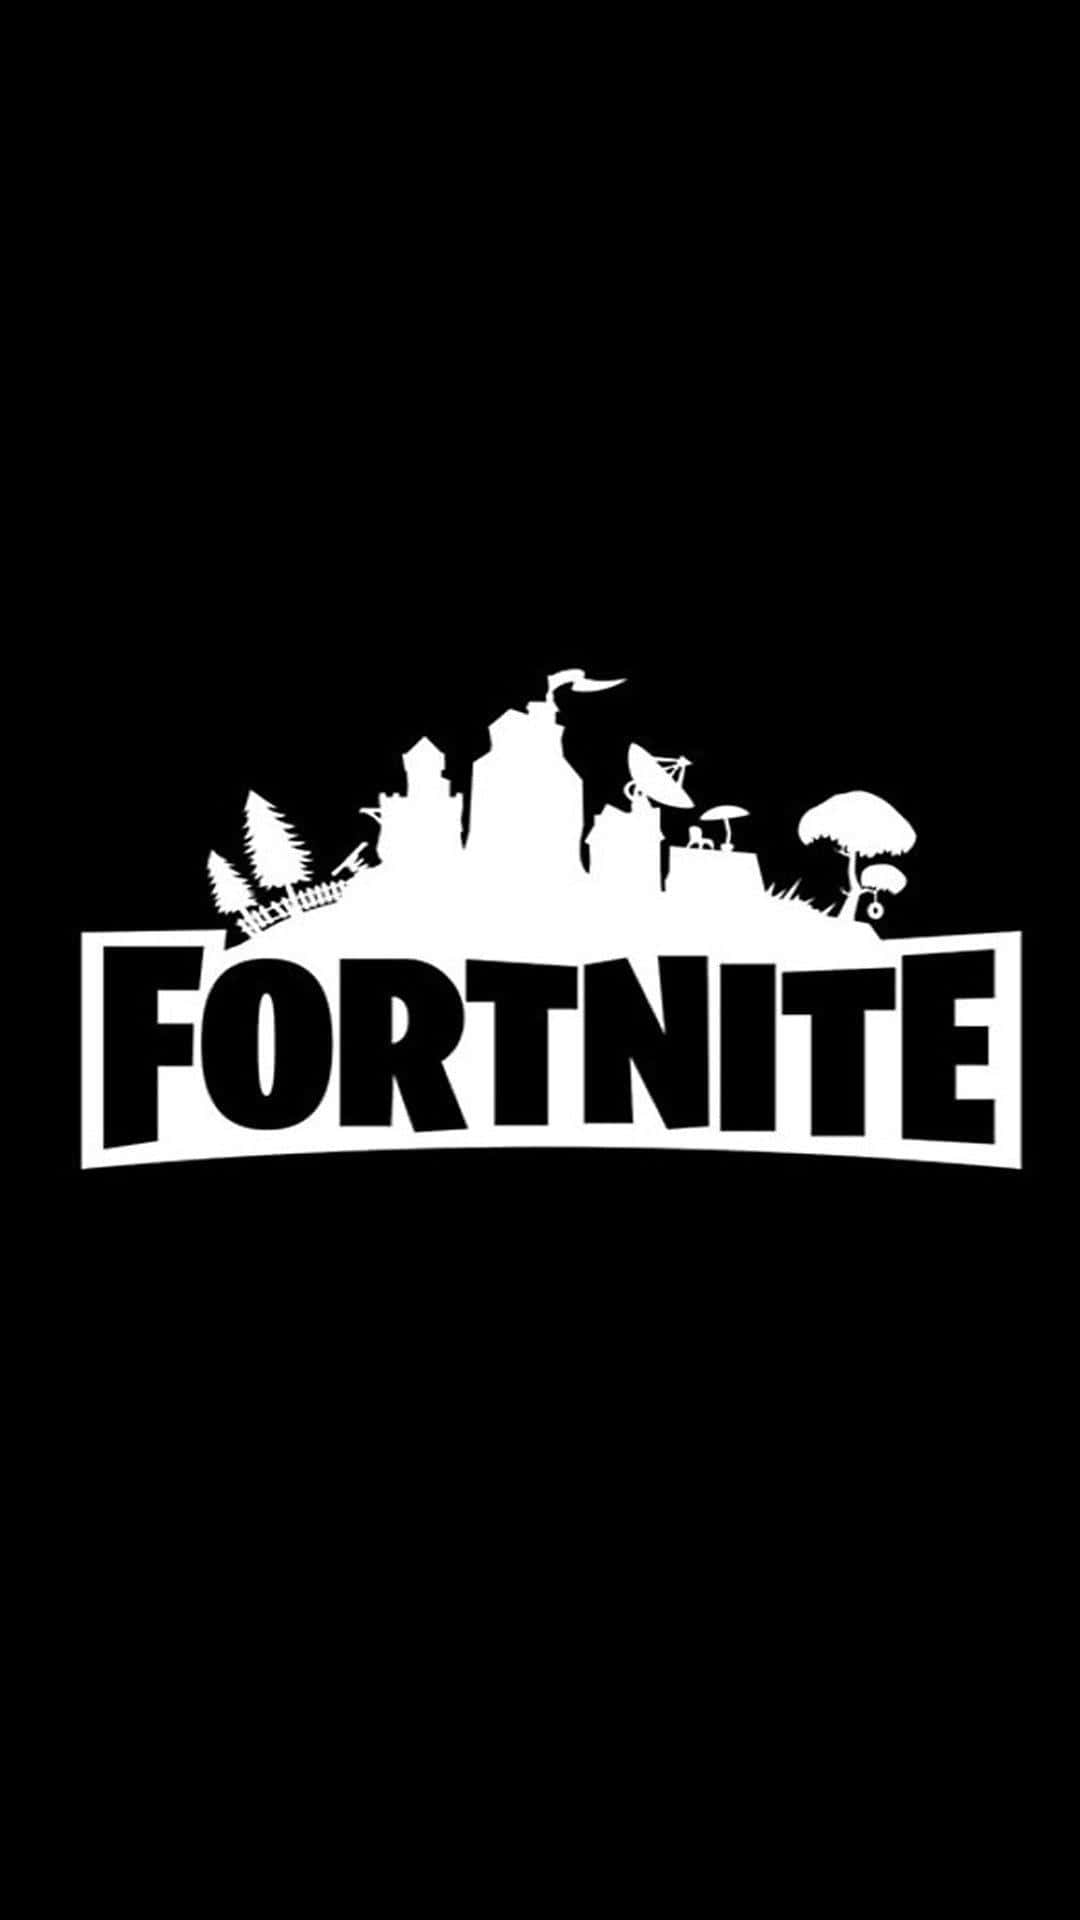 Piece Of The Map Cool Fortnite Logo Wallpaper